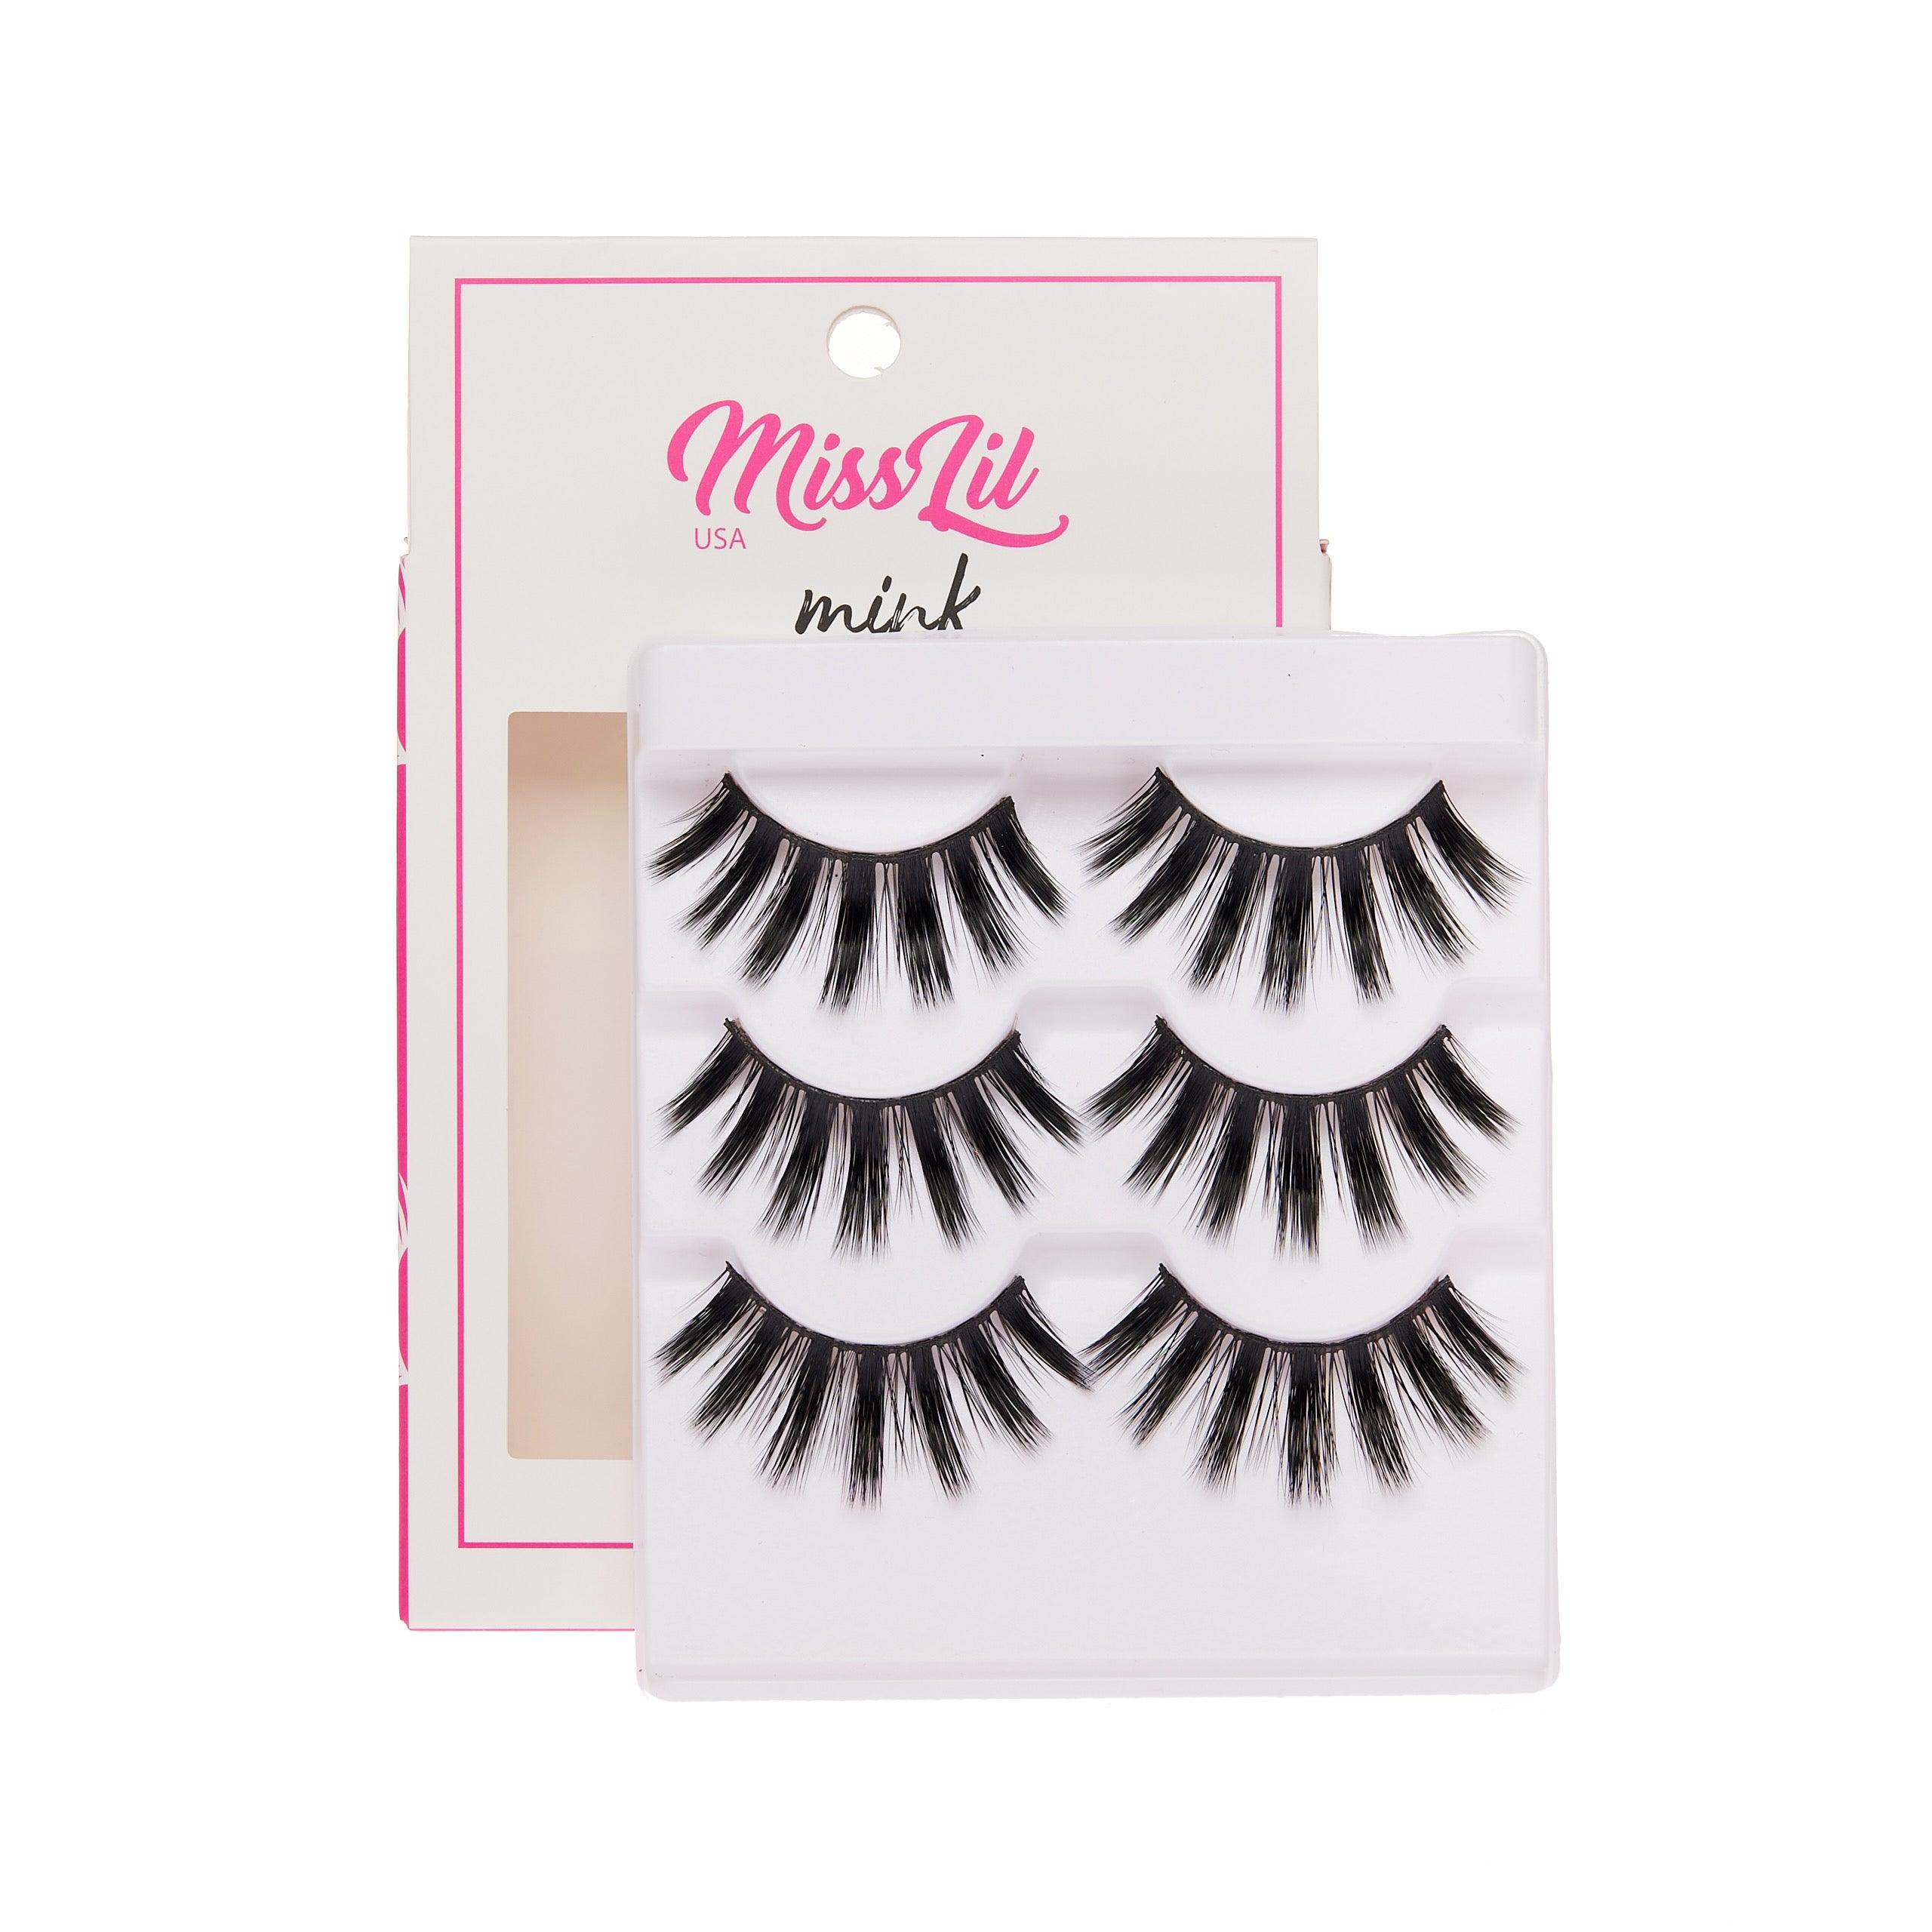 3-Pair Faux Mink Effect Eyelashes - Lash Party Collection #17 - Pack of 3 - Miss Lil USA